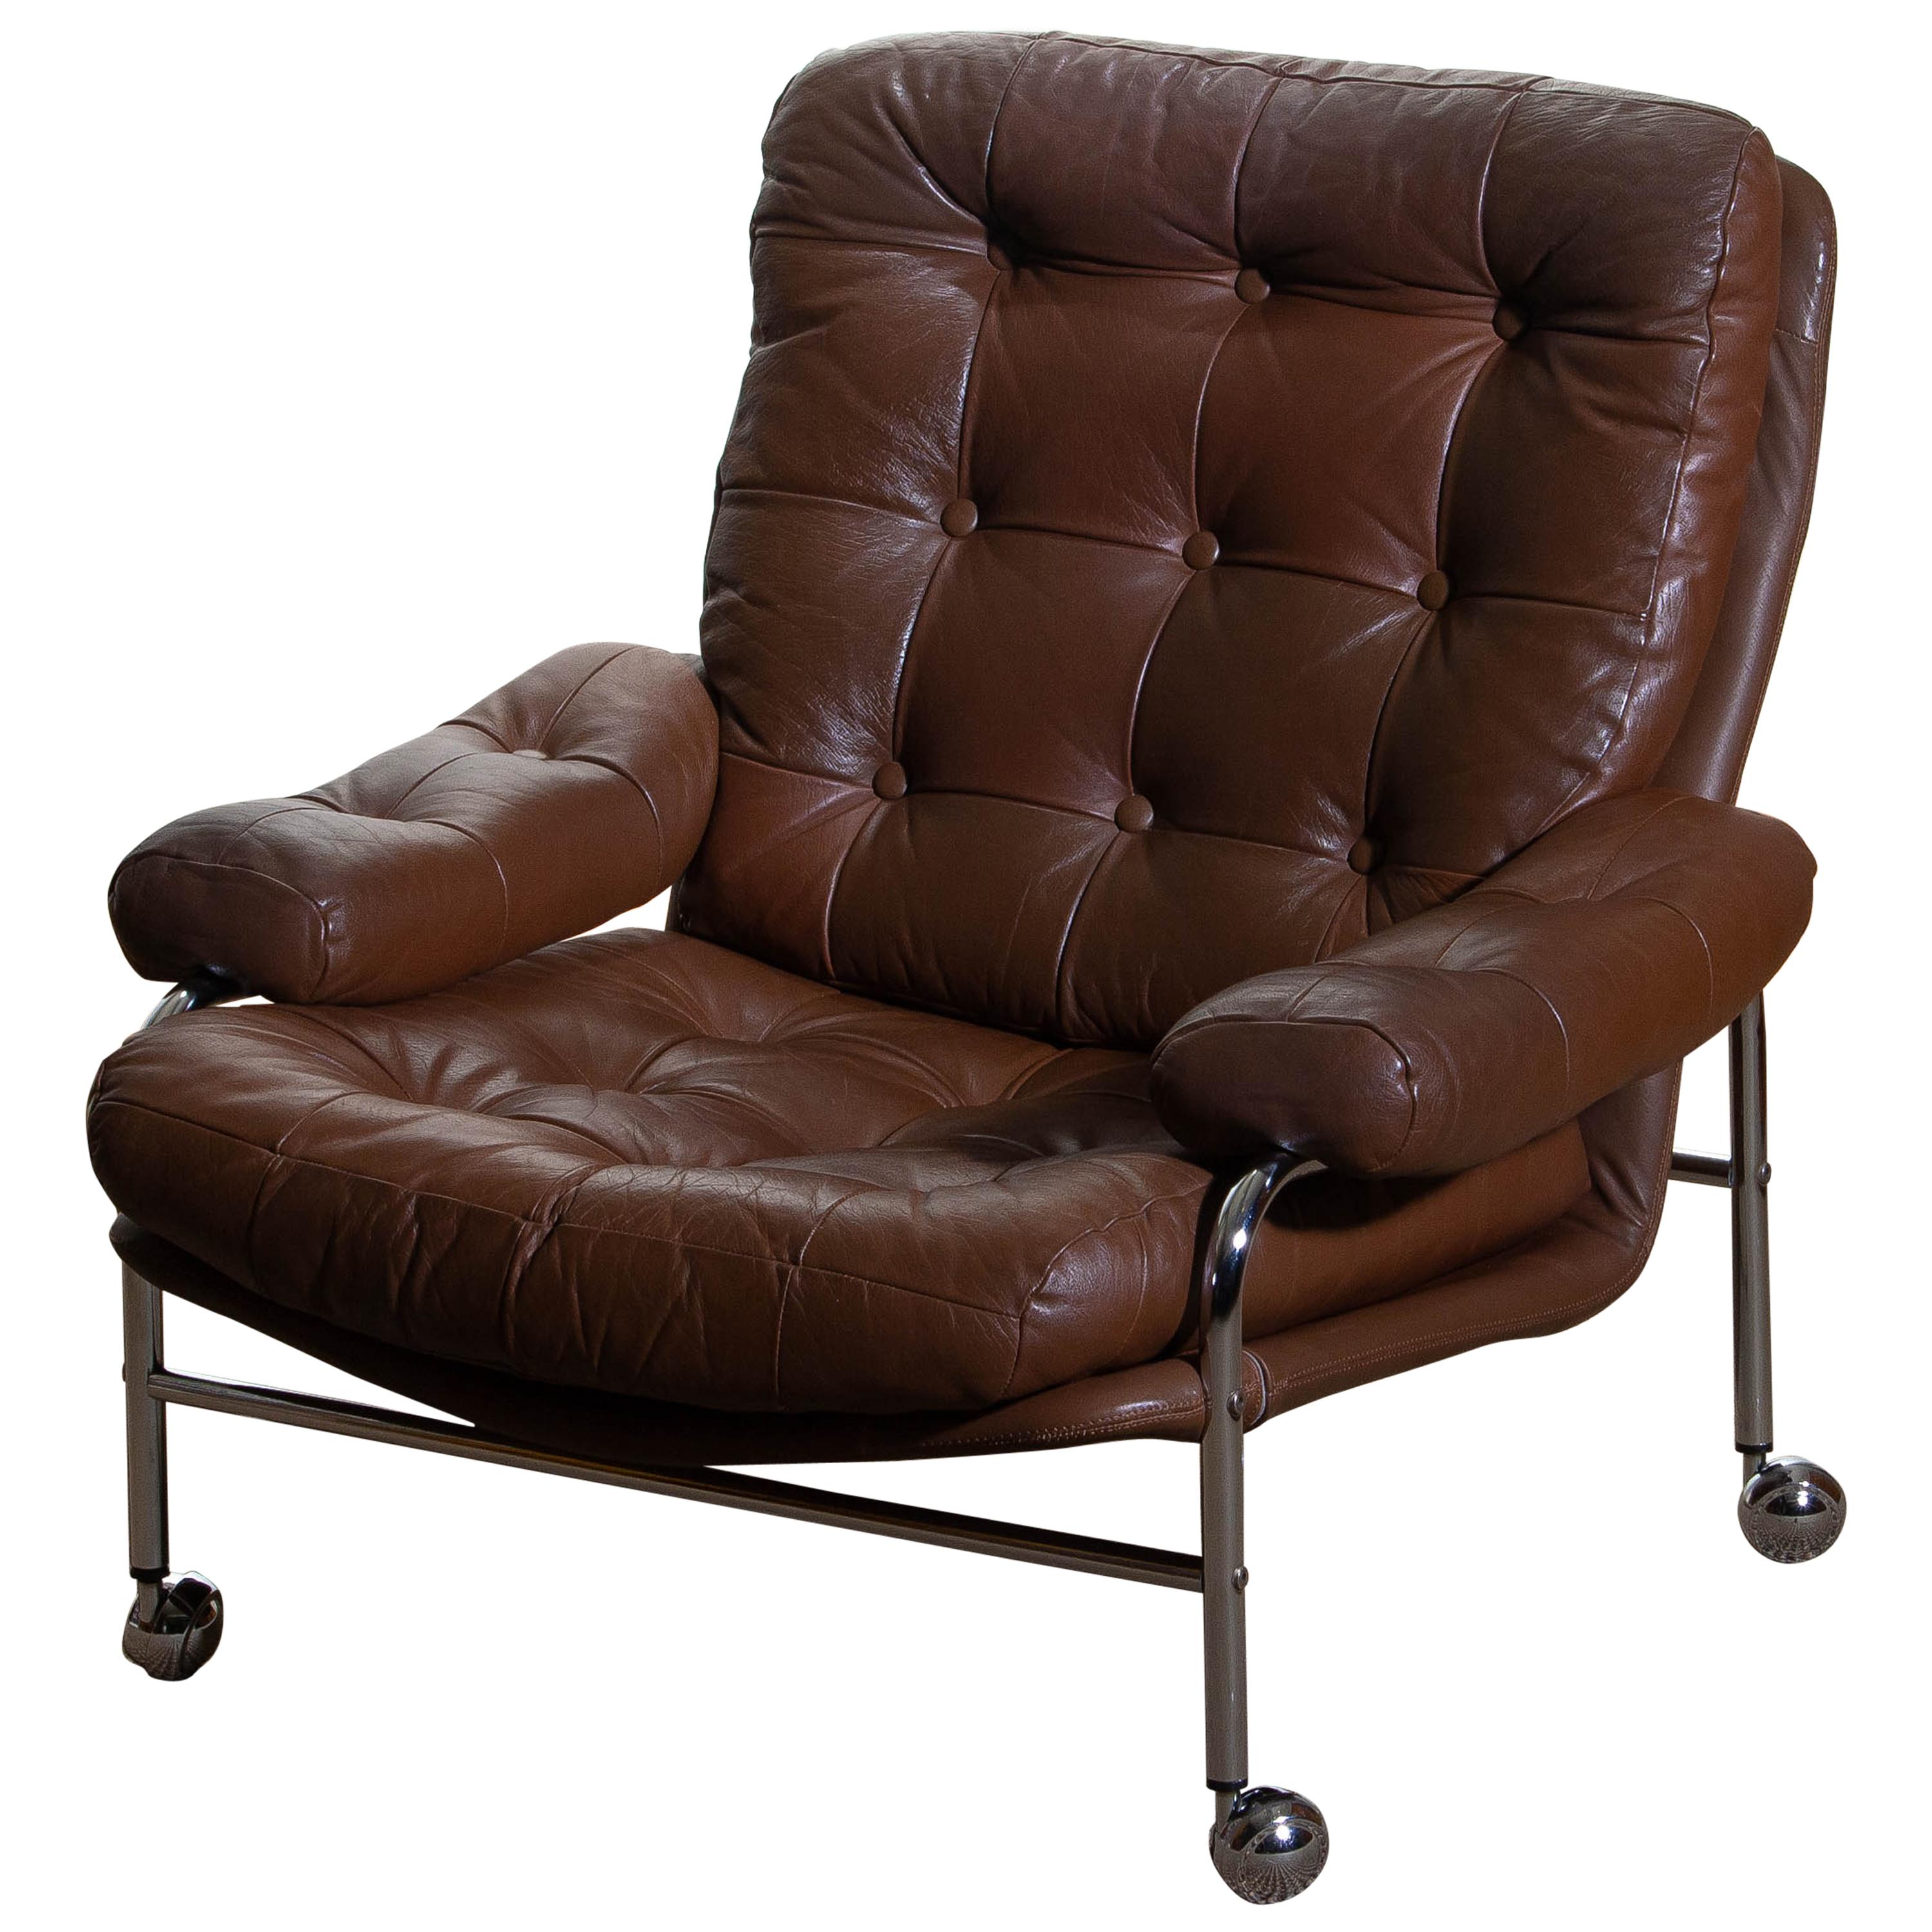 Extremely comfortable easy or lounge chair made by Scapa Rydaholm, Sweden.
This, typical Scandinavian chair is upholstered with brown leather based on a chromed metal frame.
All in perfect condition.
Note: We have two chairs on stock!
   